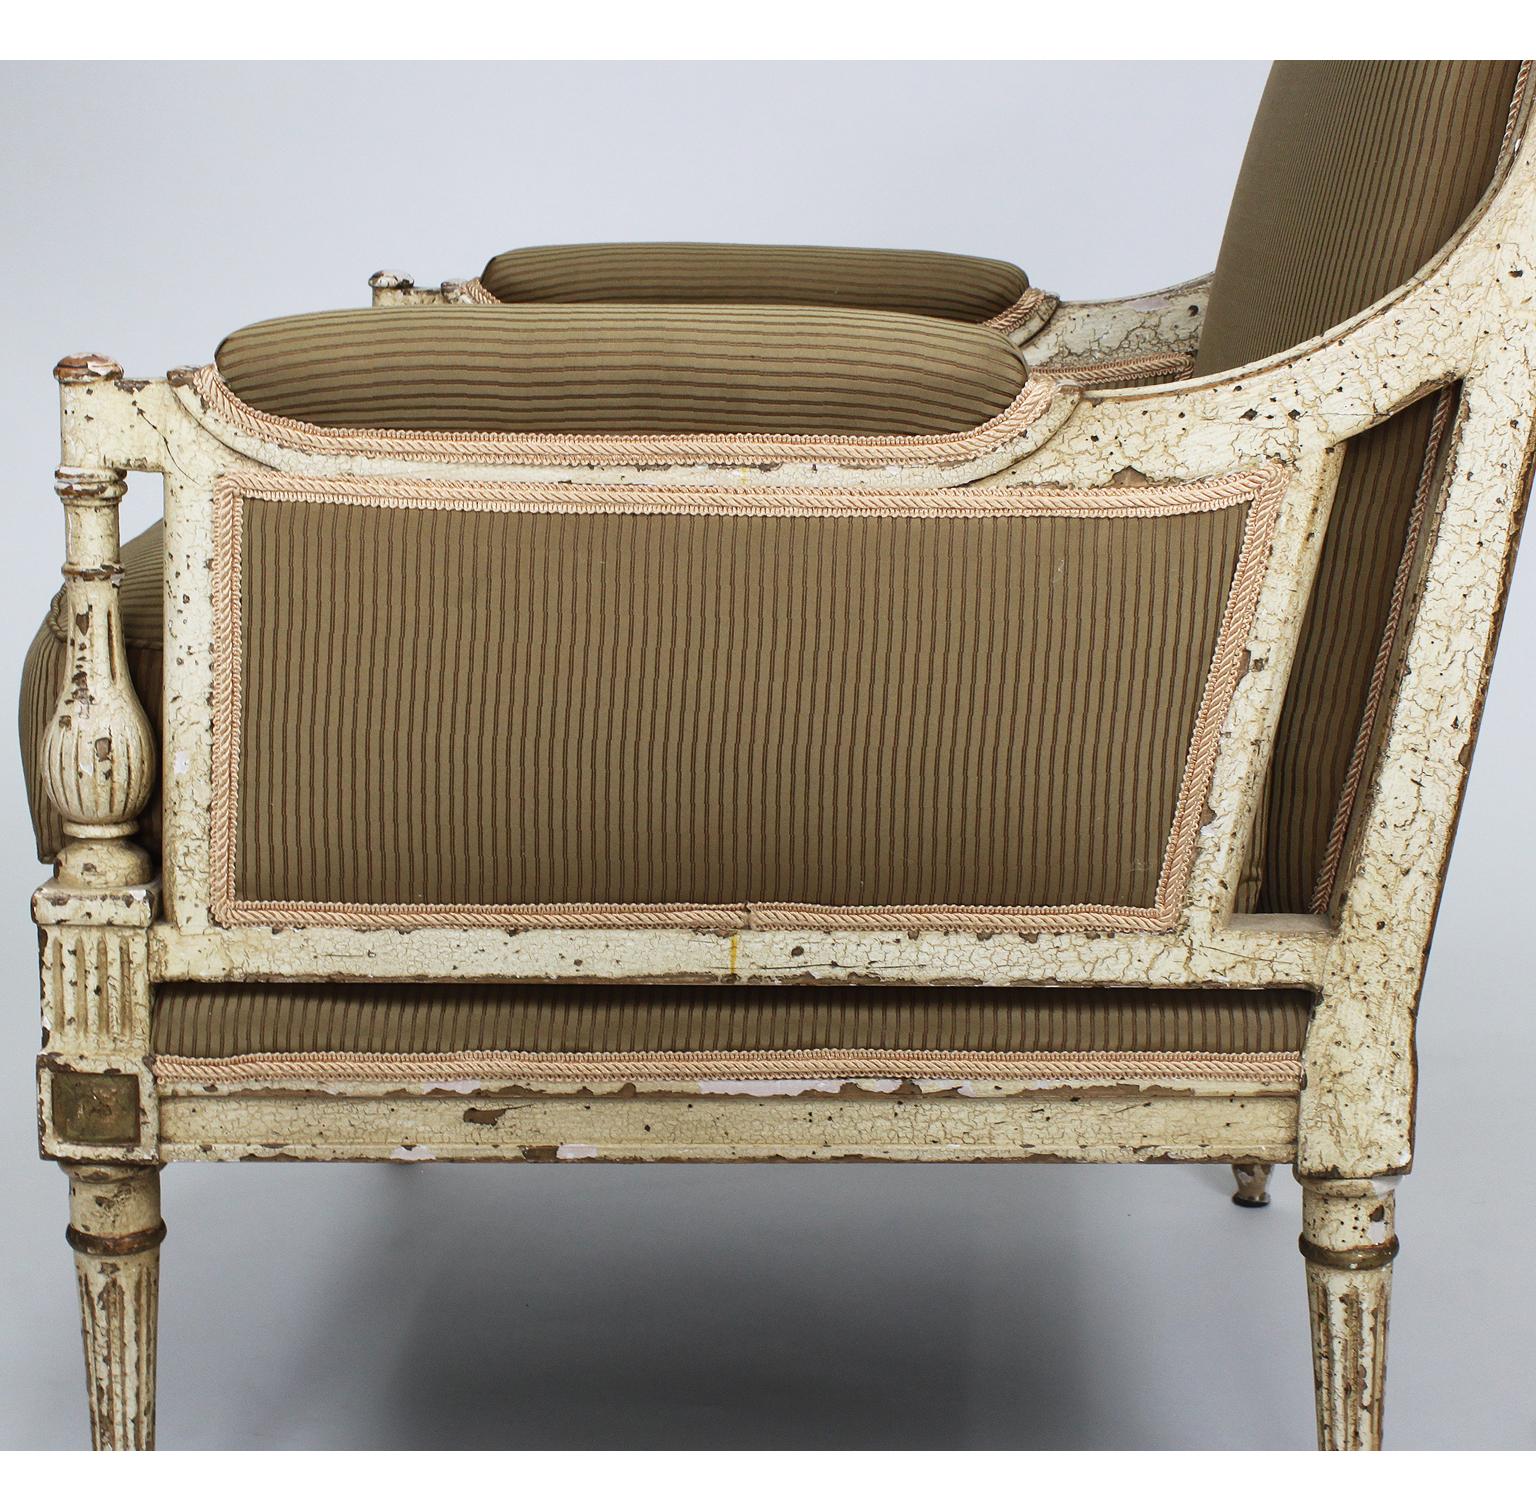 French 19th Century Louis XVI Style White-Painted Lounge Chaise Ottoman Armchair For Sale 3